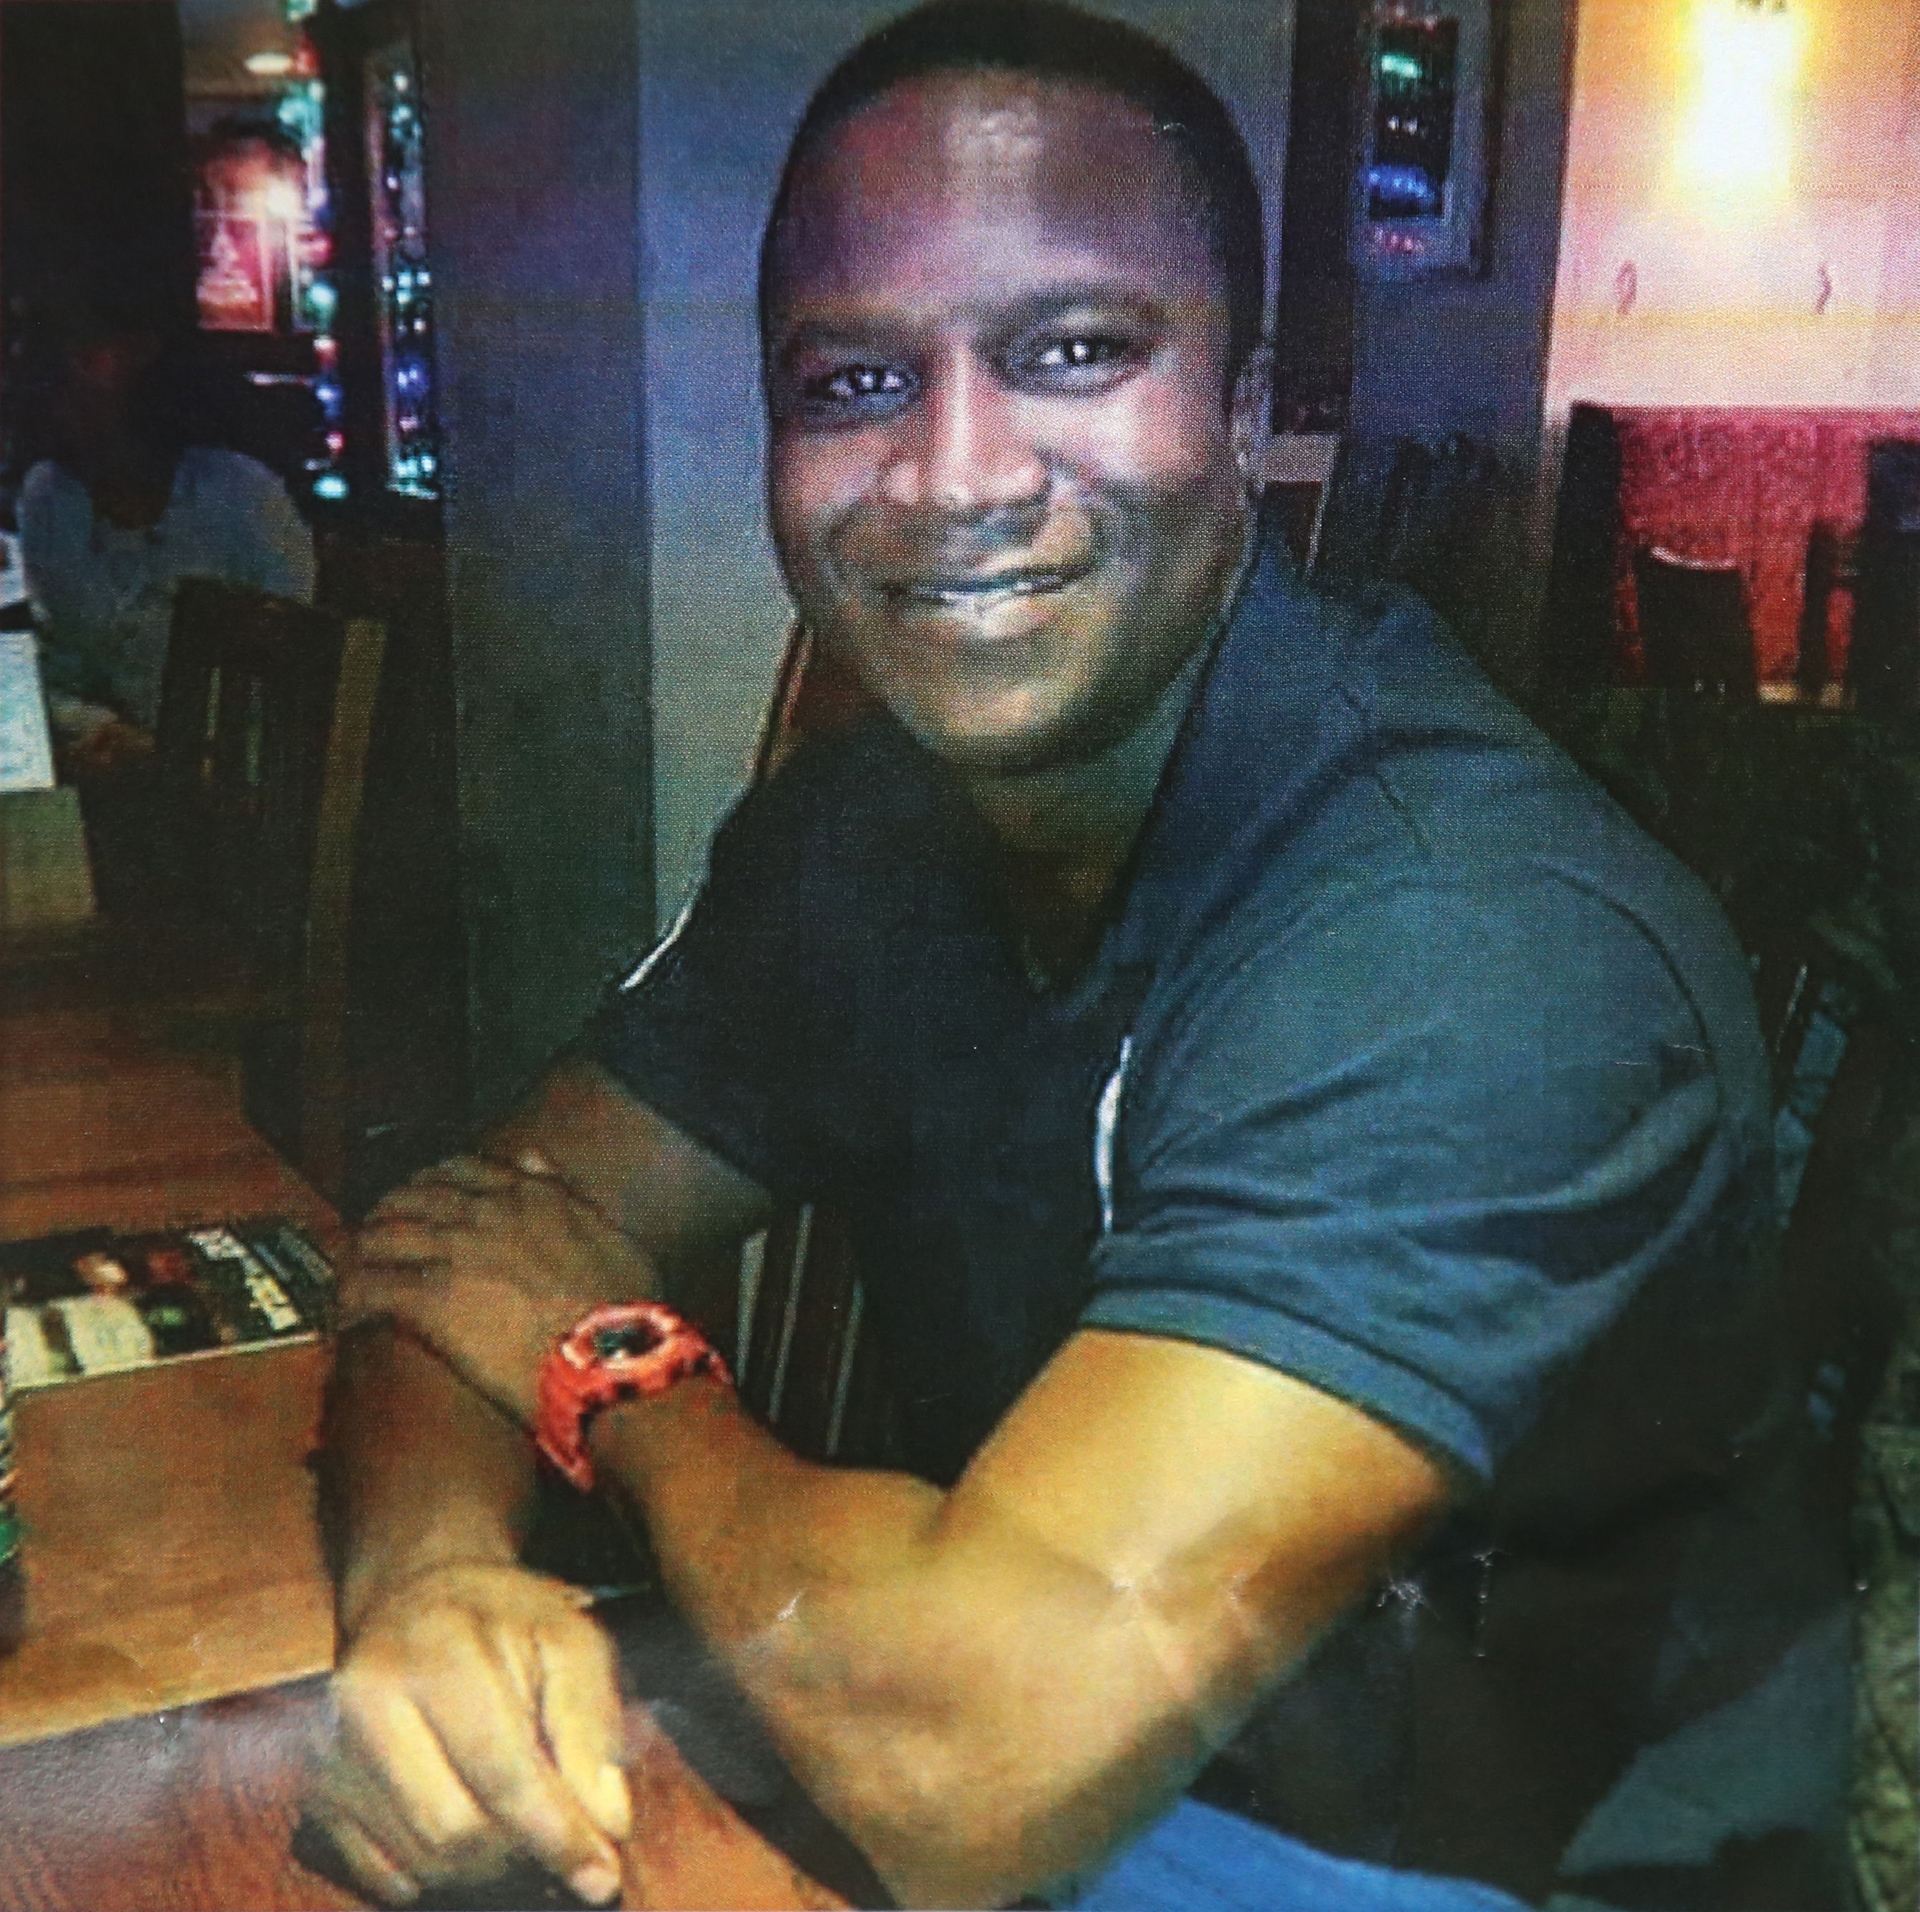 Sheku Bayoh who died in police custody May 2015 while being restrained by officers who were responding to a call in Kirkcaldy, Fife.